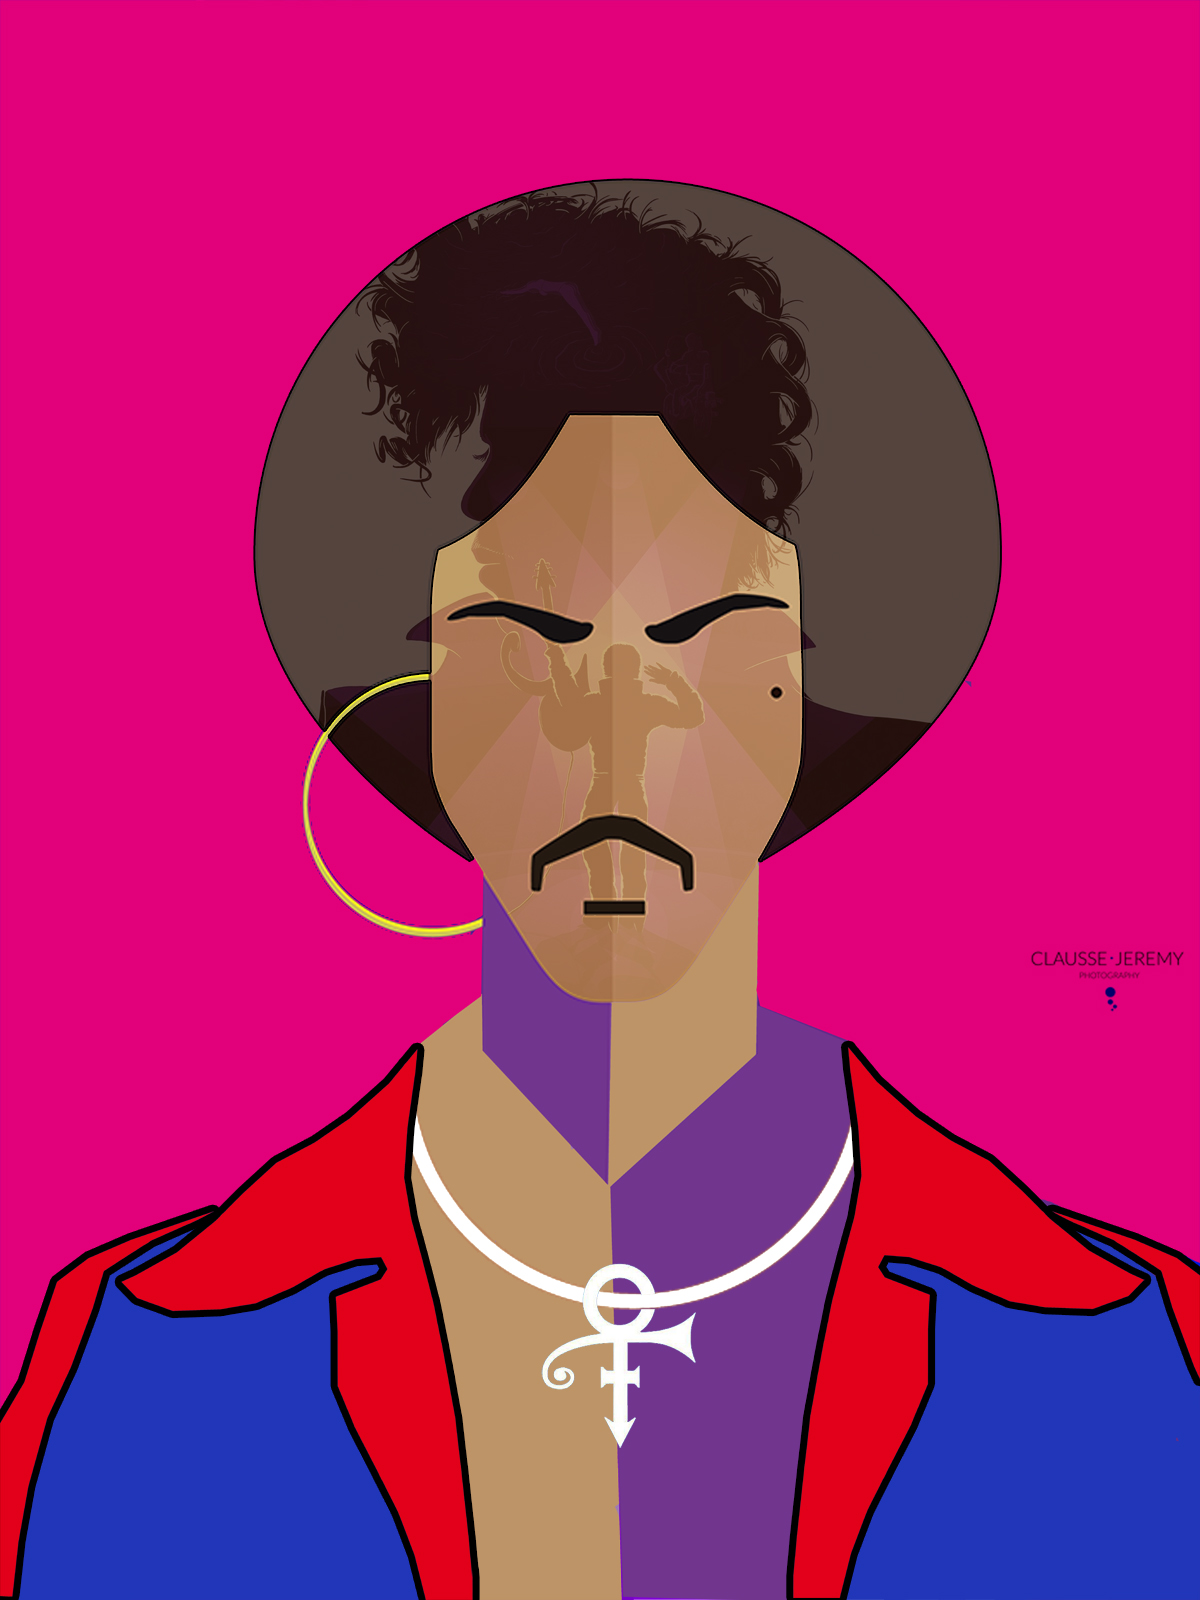 Tribute to Prince